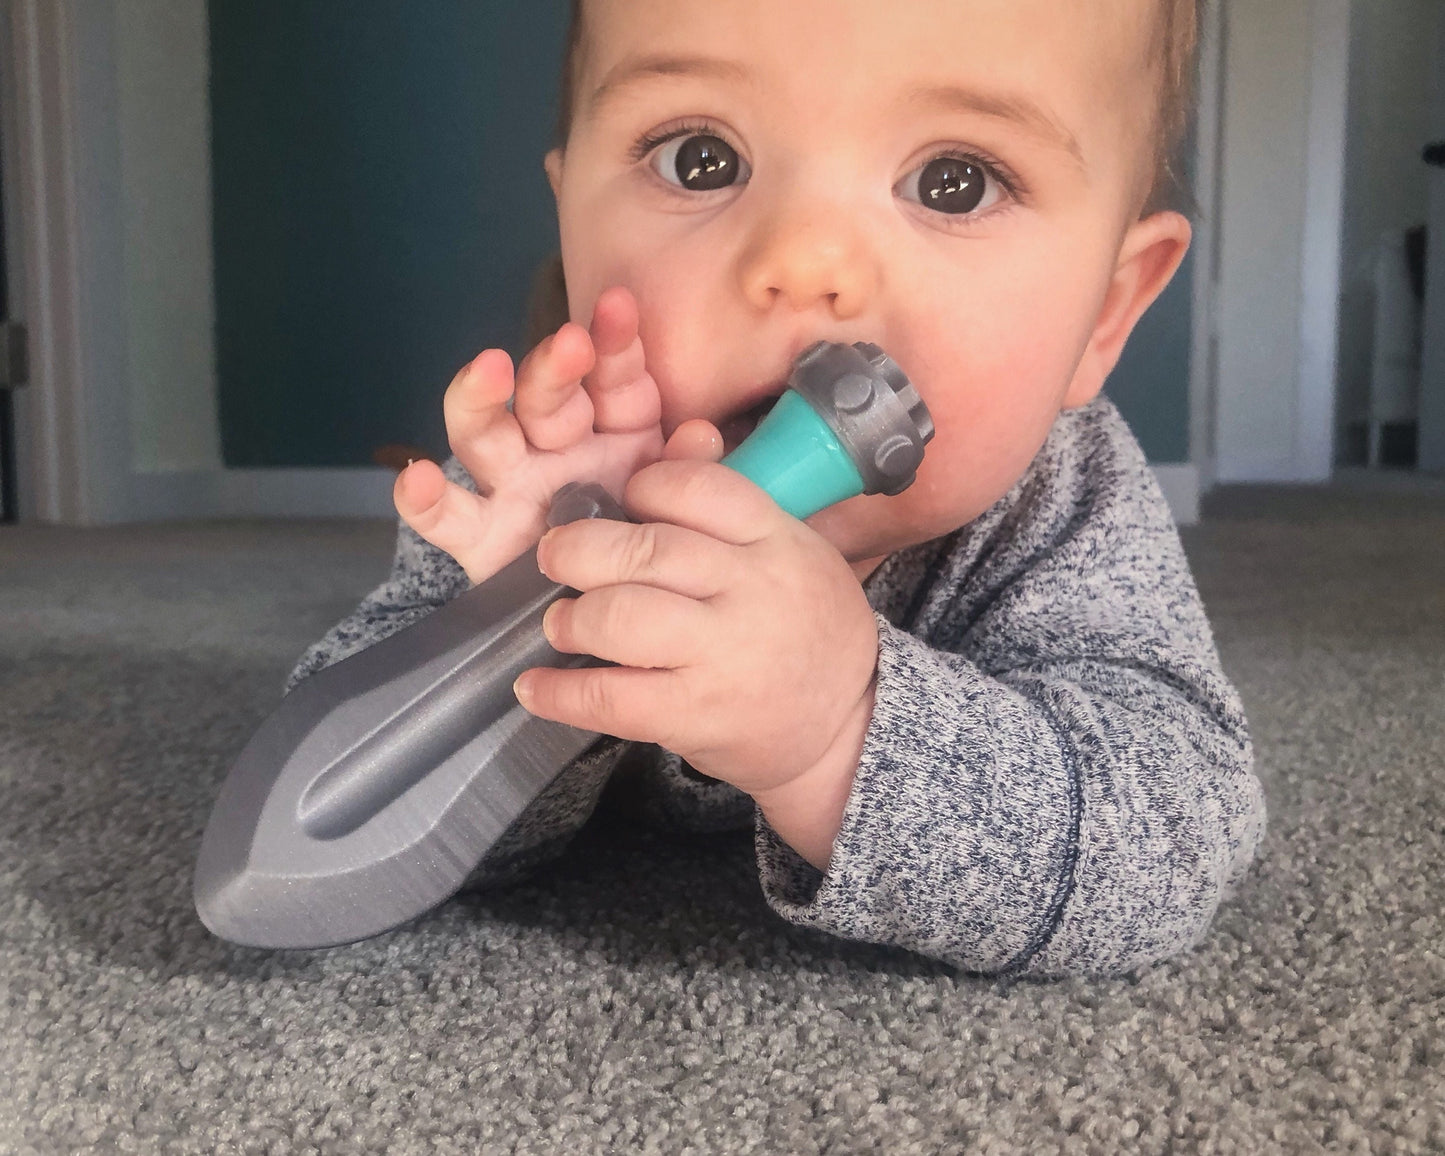 Baby's First Sword - Fun Rattle Sensory Toy for Babies and Toddlers